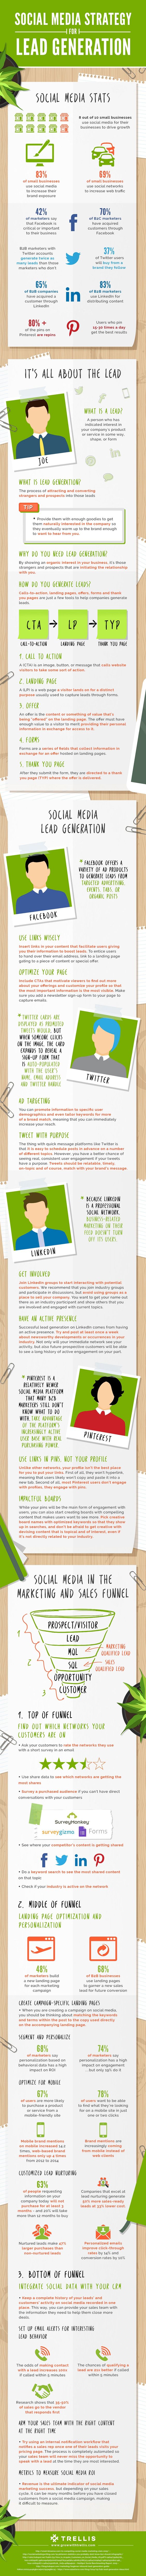 Social Media Strategy For Lead Generation